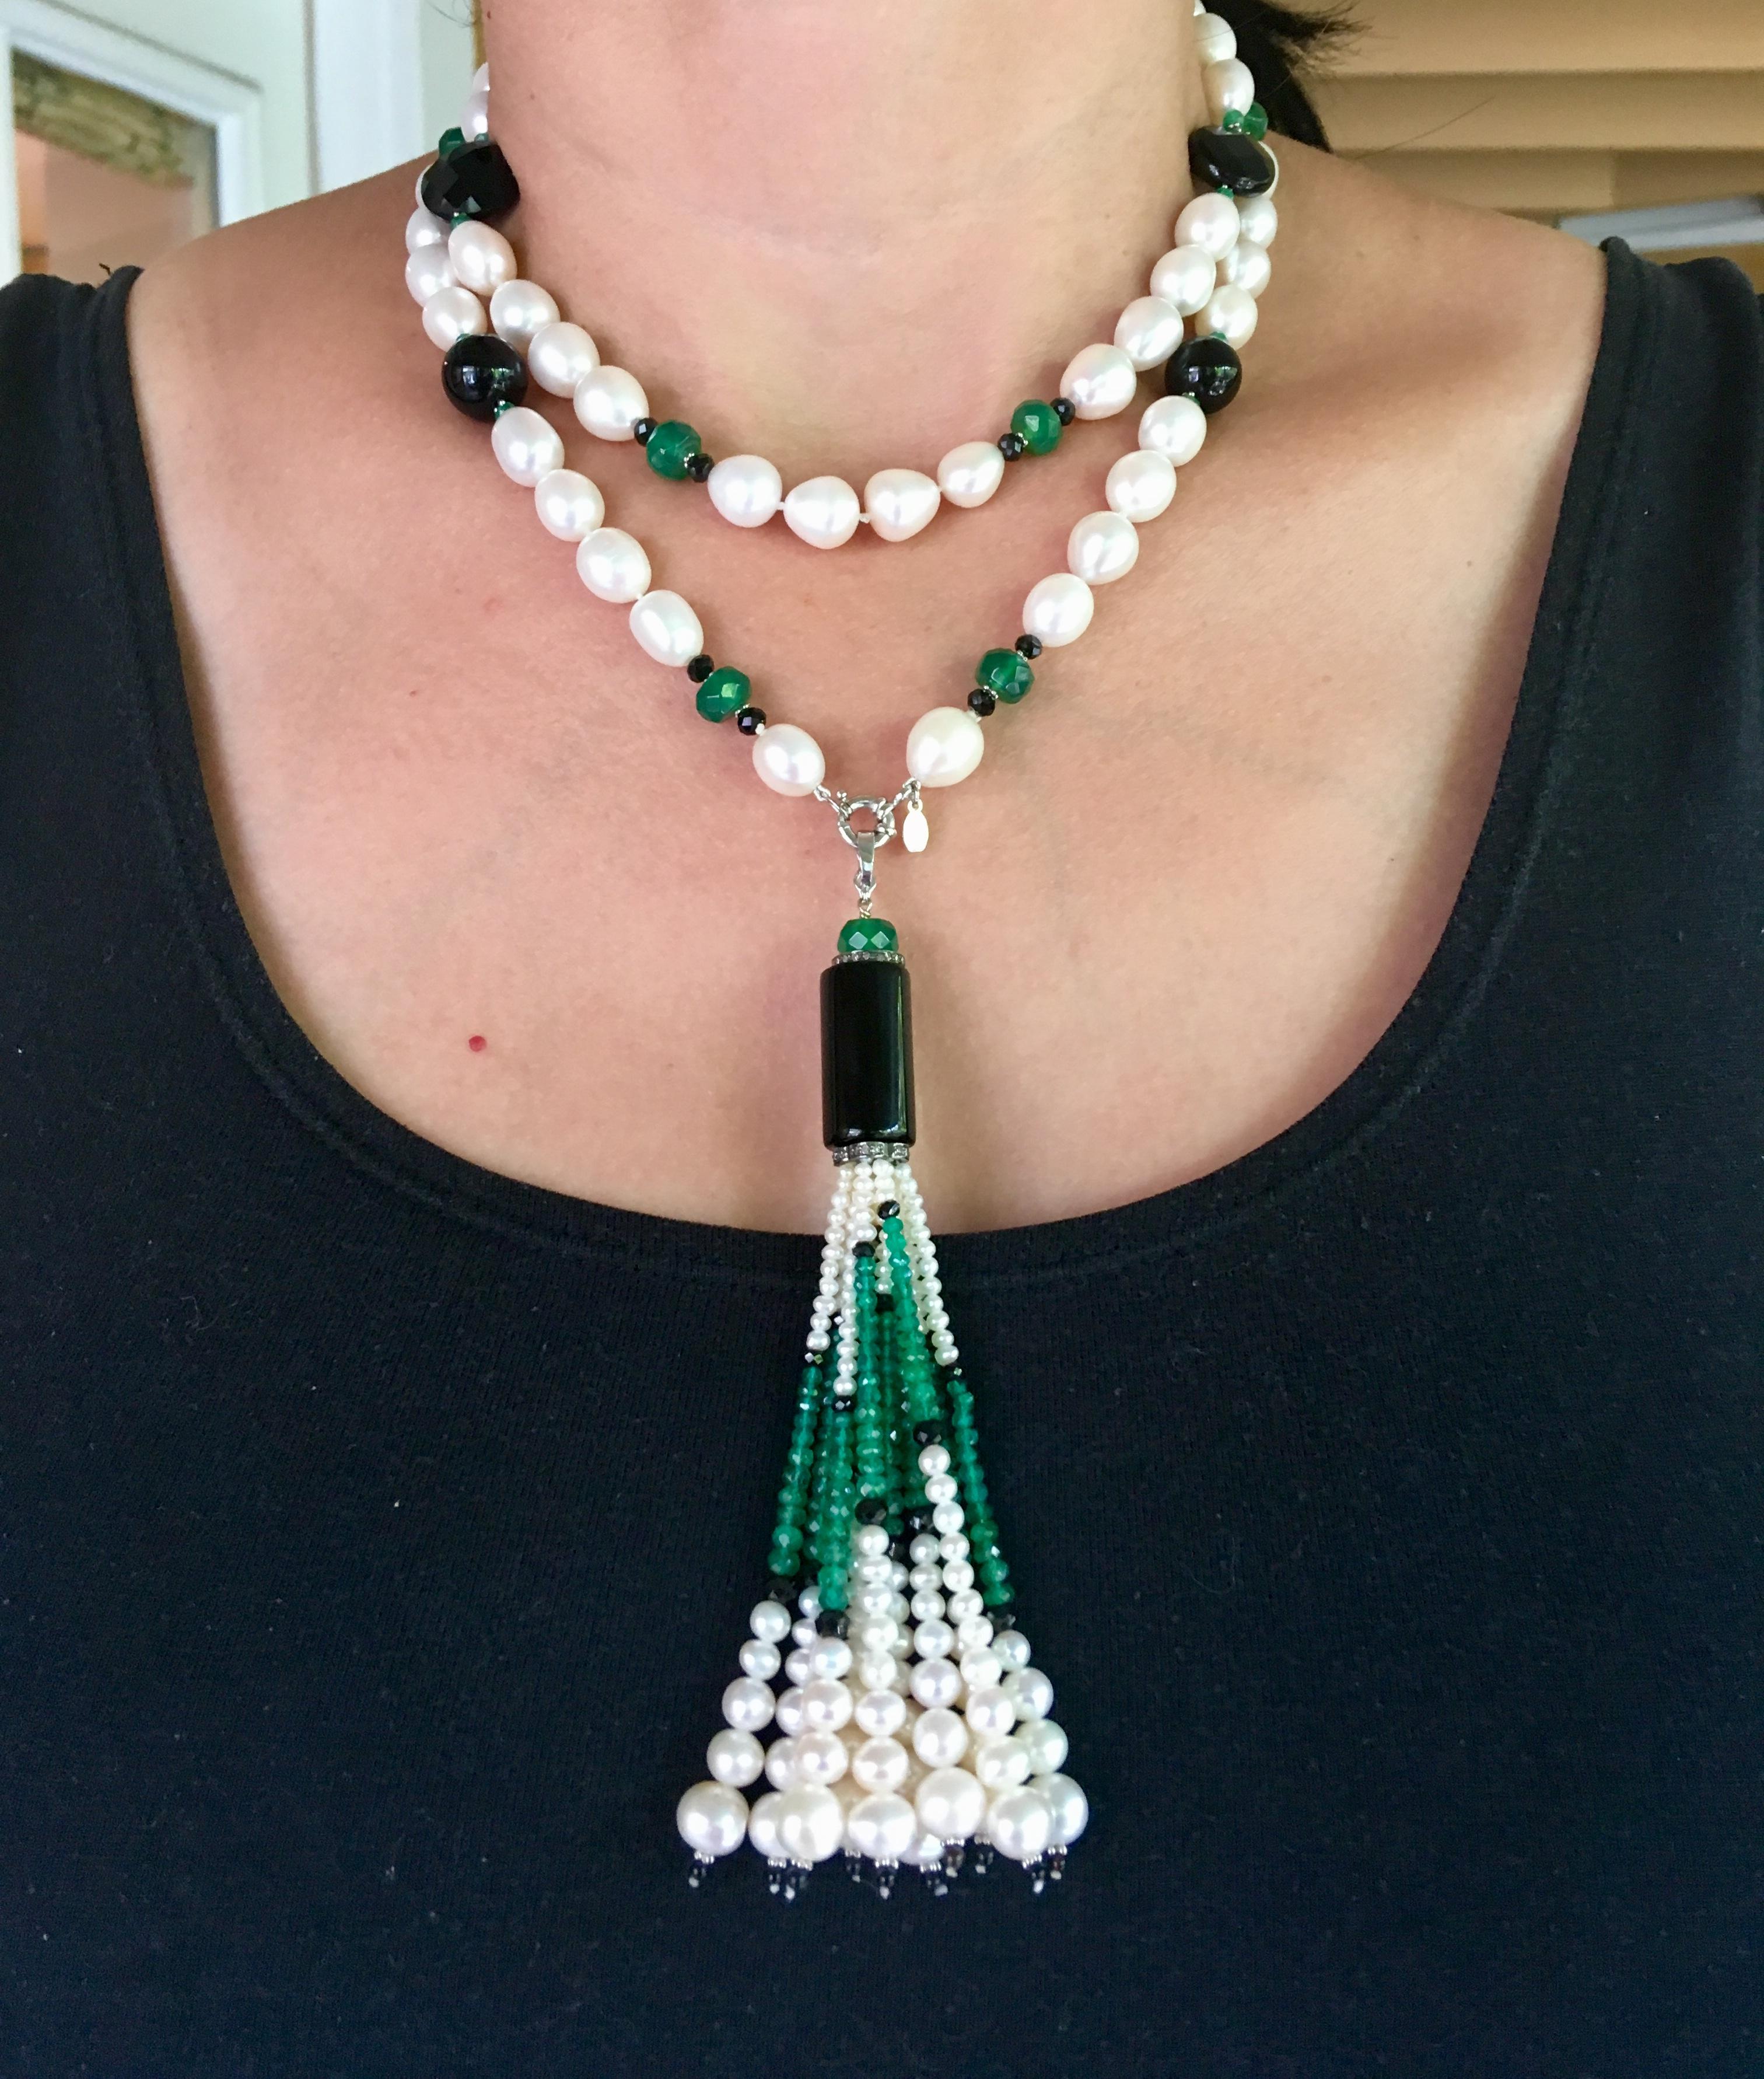 Black Onyx, Jade and Pearl Necklace with Tassel and 14 Karat White Gold Clasp 3